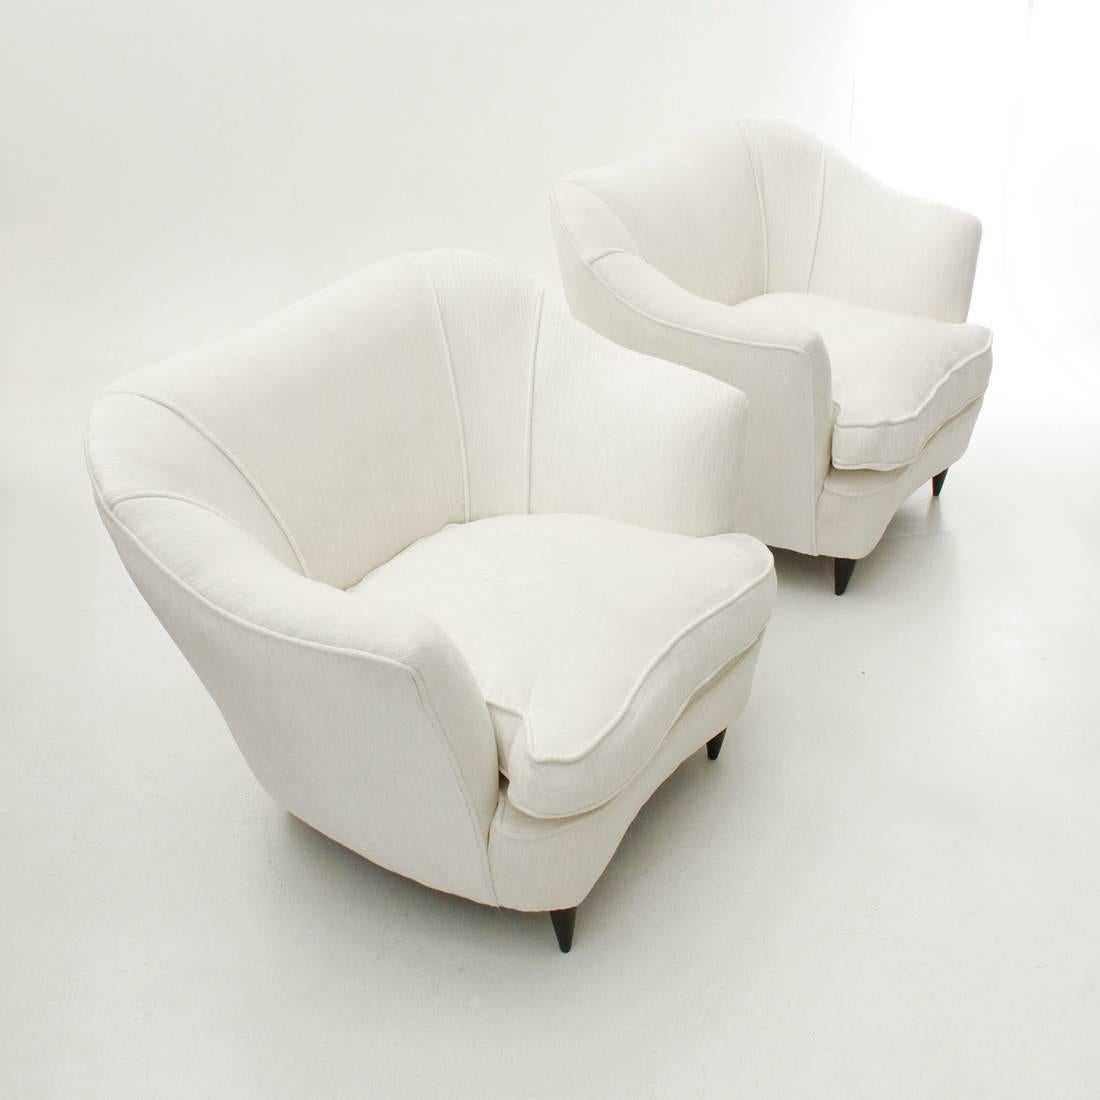 Two Italian armchairs, produced in the 1950s.
Wooden structure padded and lined with new white velvet fabric.
Seat with removable padded cushion.
Wooden legs with conical shape.
Excellent general conditions.

Dimensions: Width 97 cm, depth 80